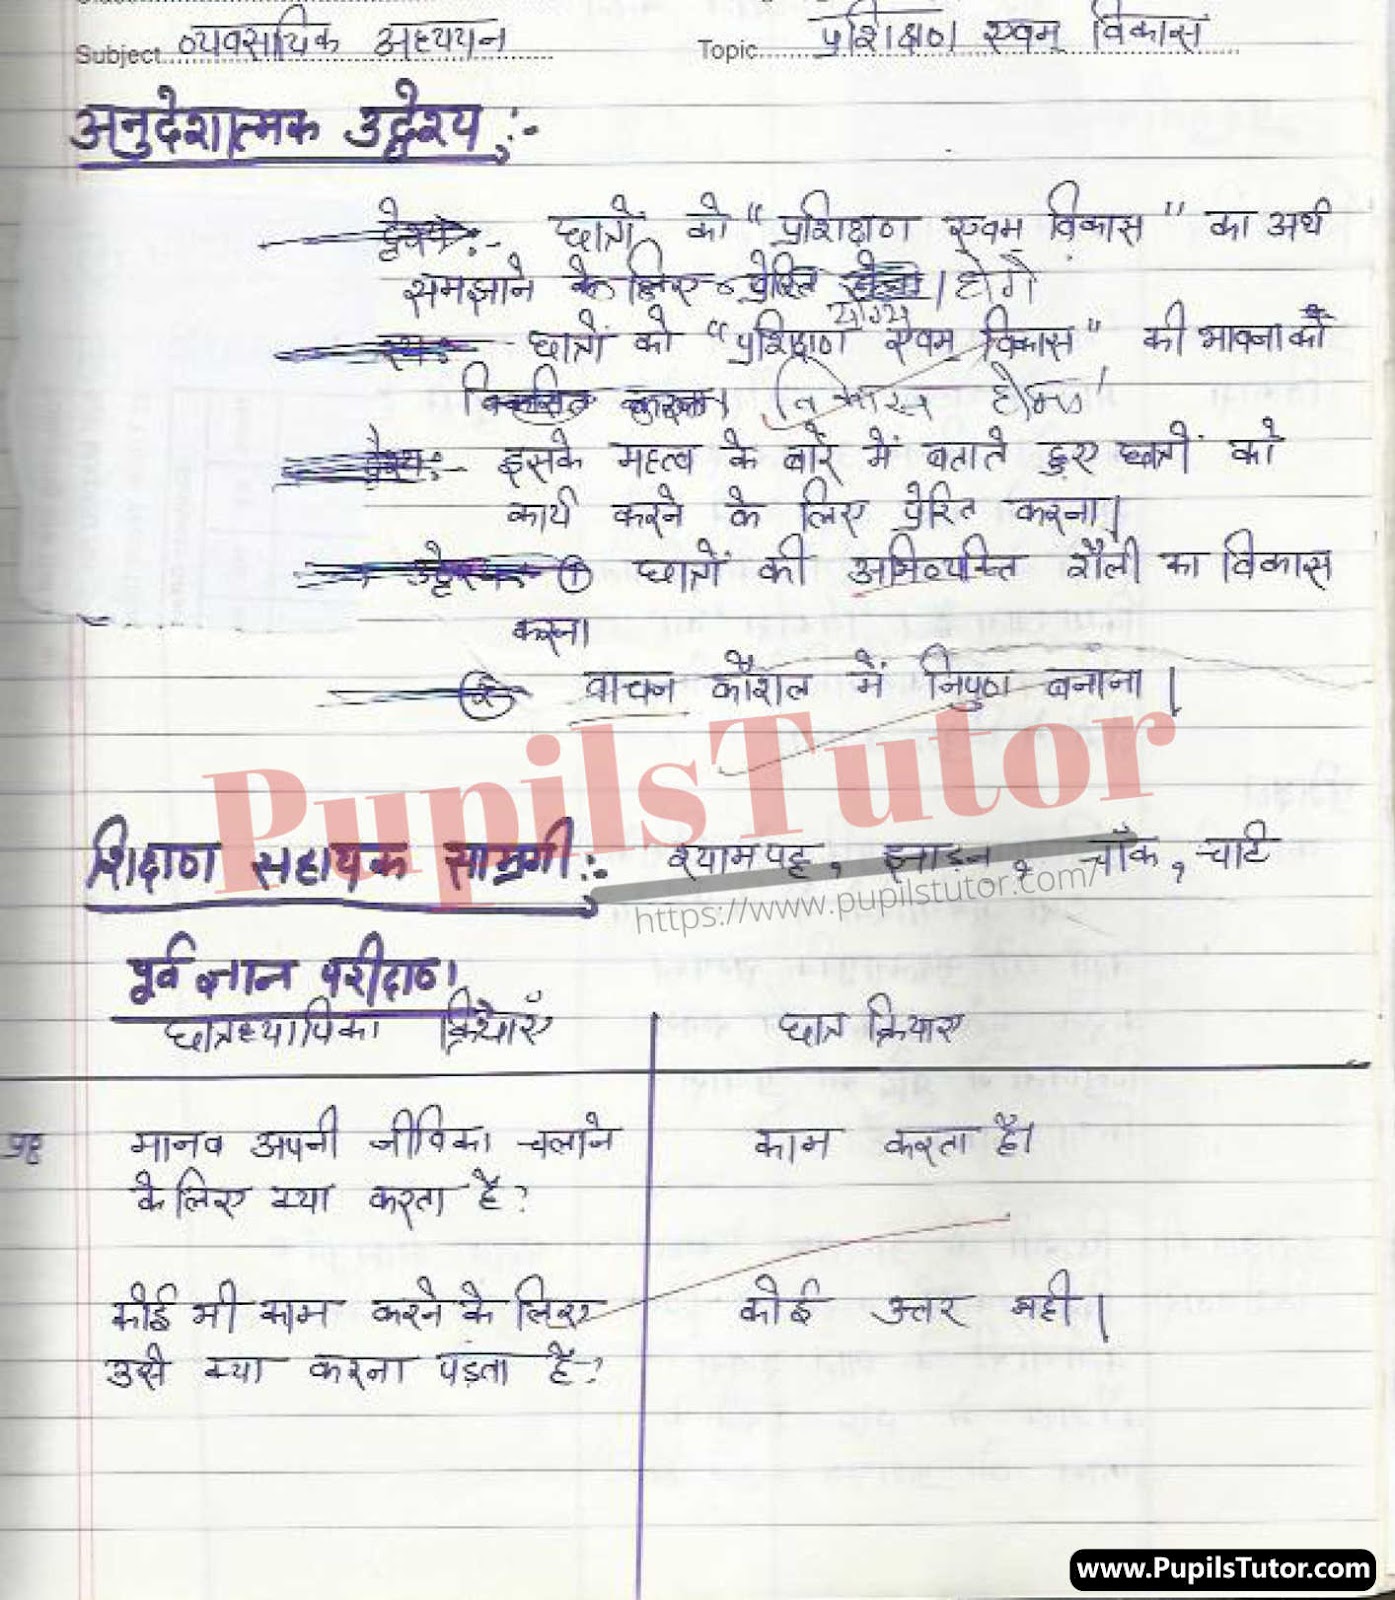 Parshikshan Evam Vikas Lesson Plan | Training & Development Lesson Plan In Hindi For Class 9 – (Page And Image Number 1) – Pupils Tutor